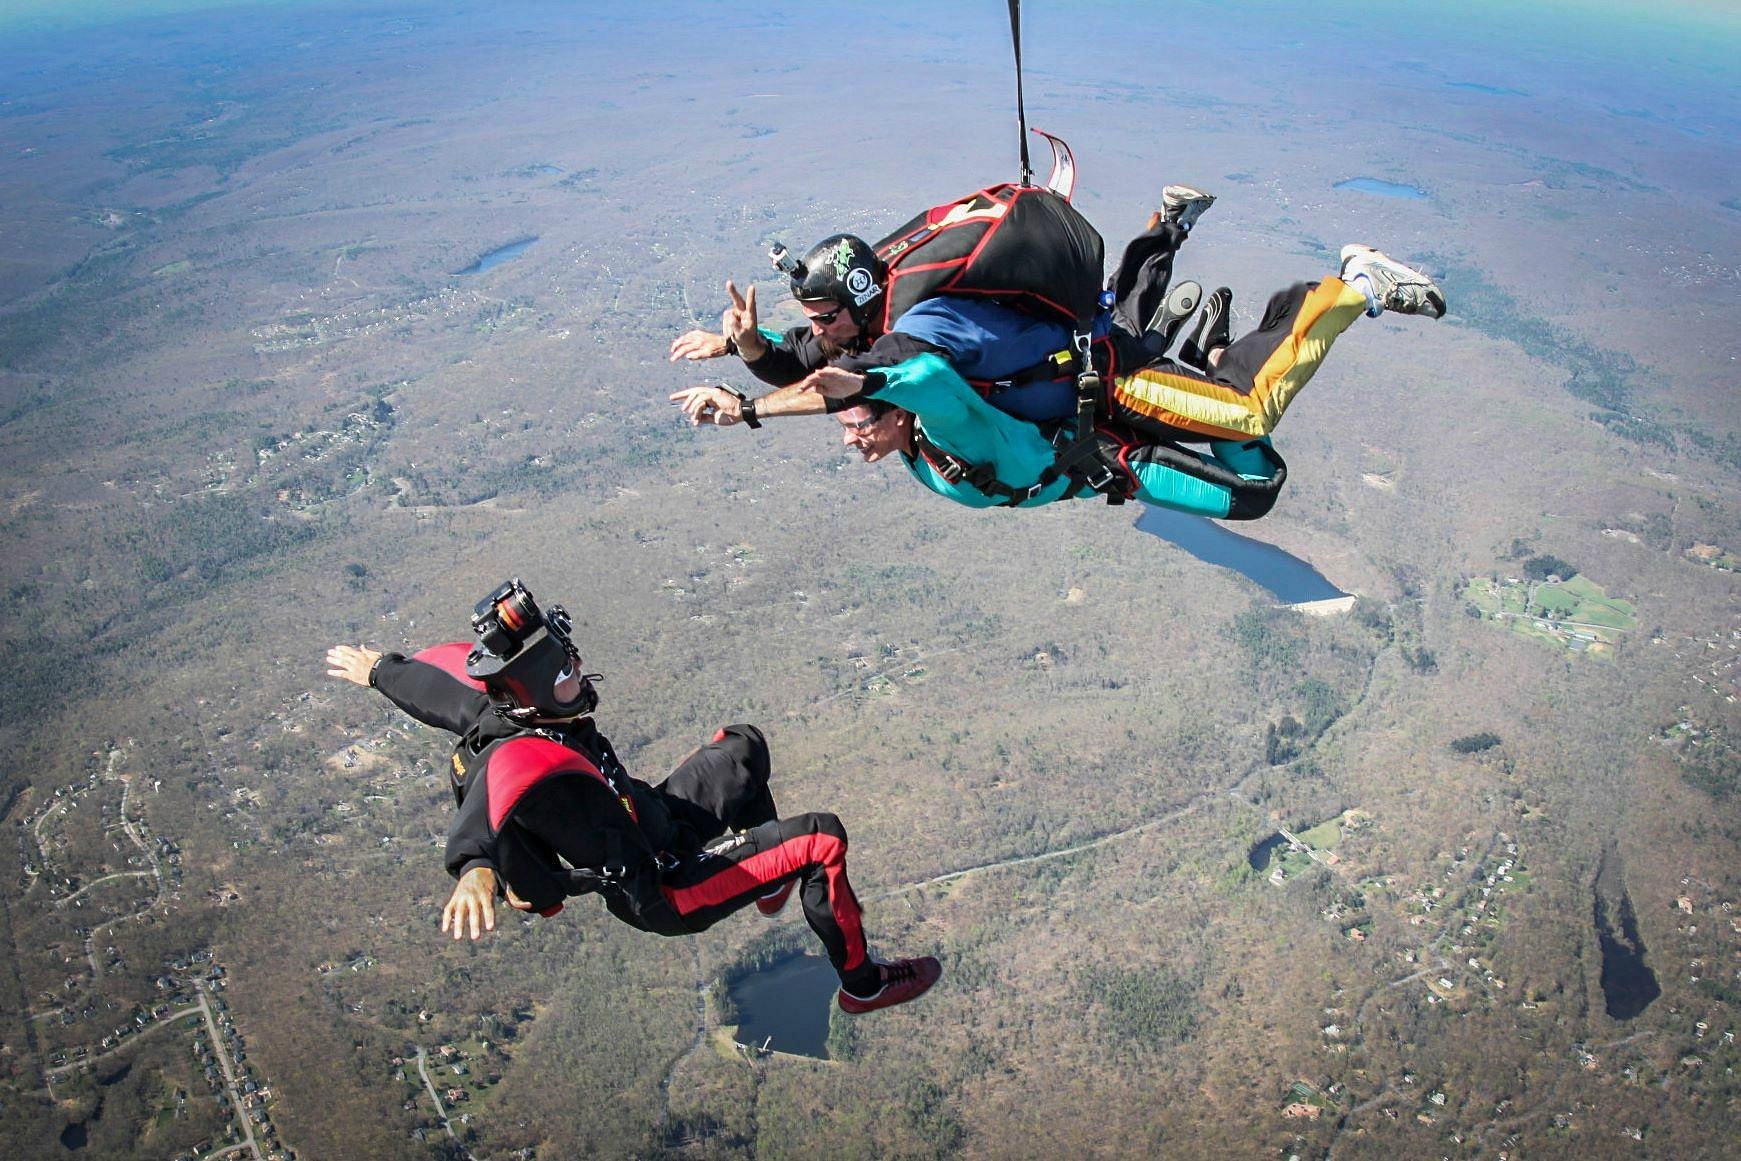 Sky's The Limit Skydiving Center (East Stroudsburg) All You Need to